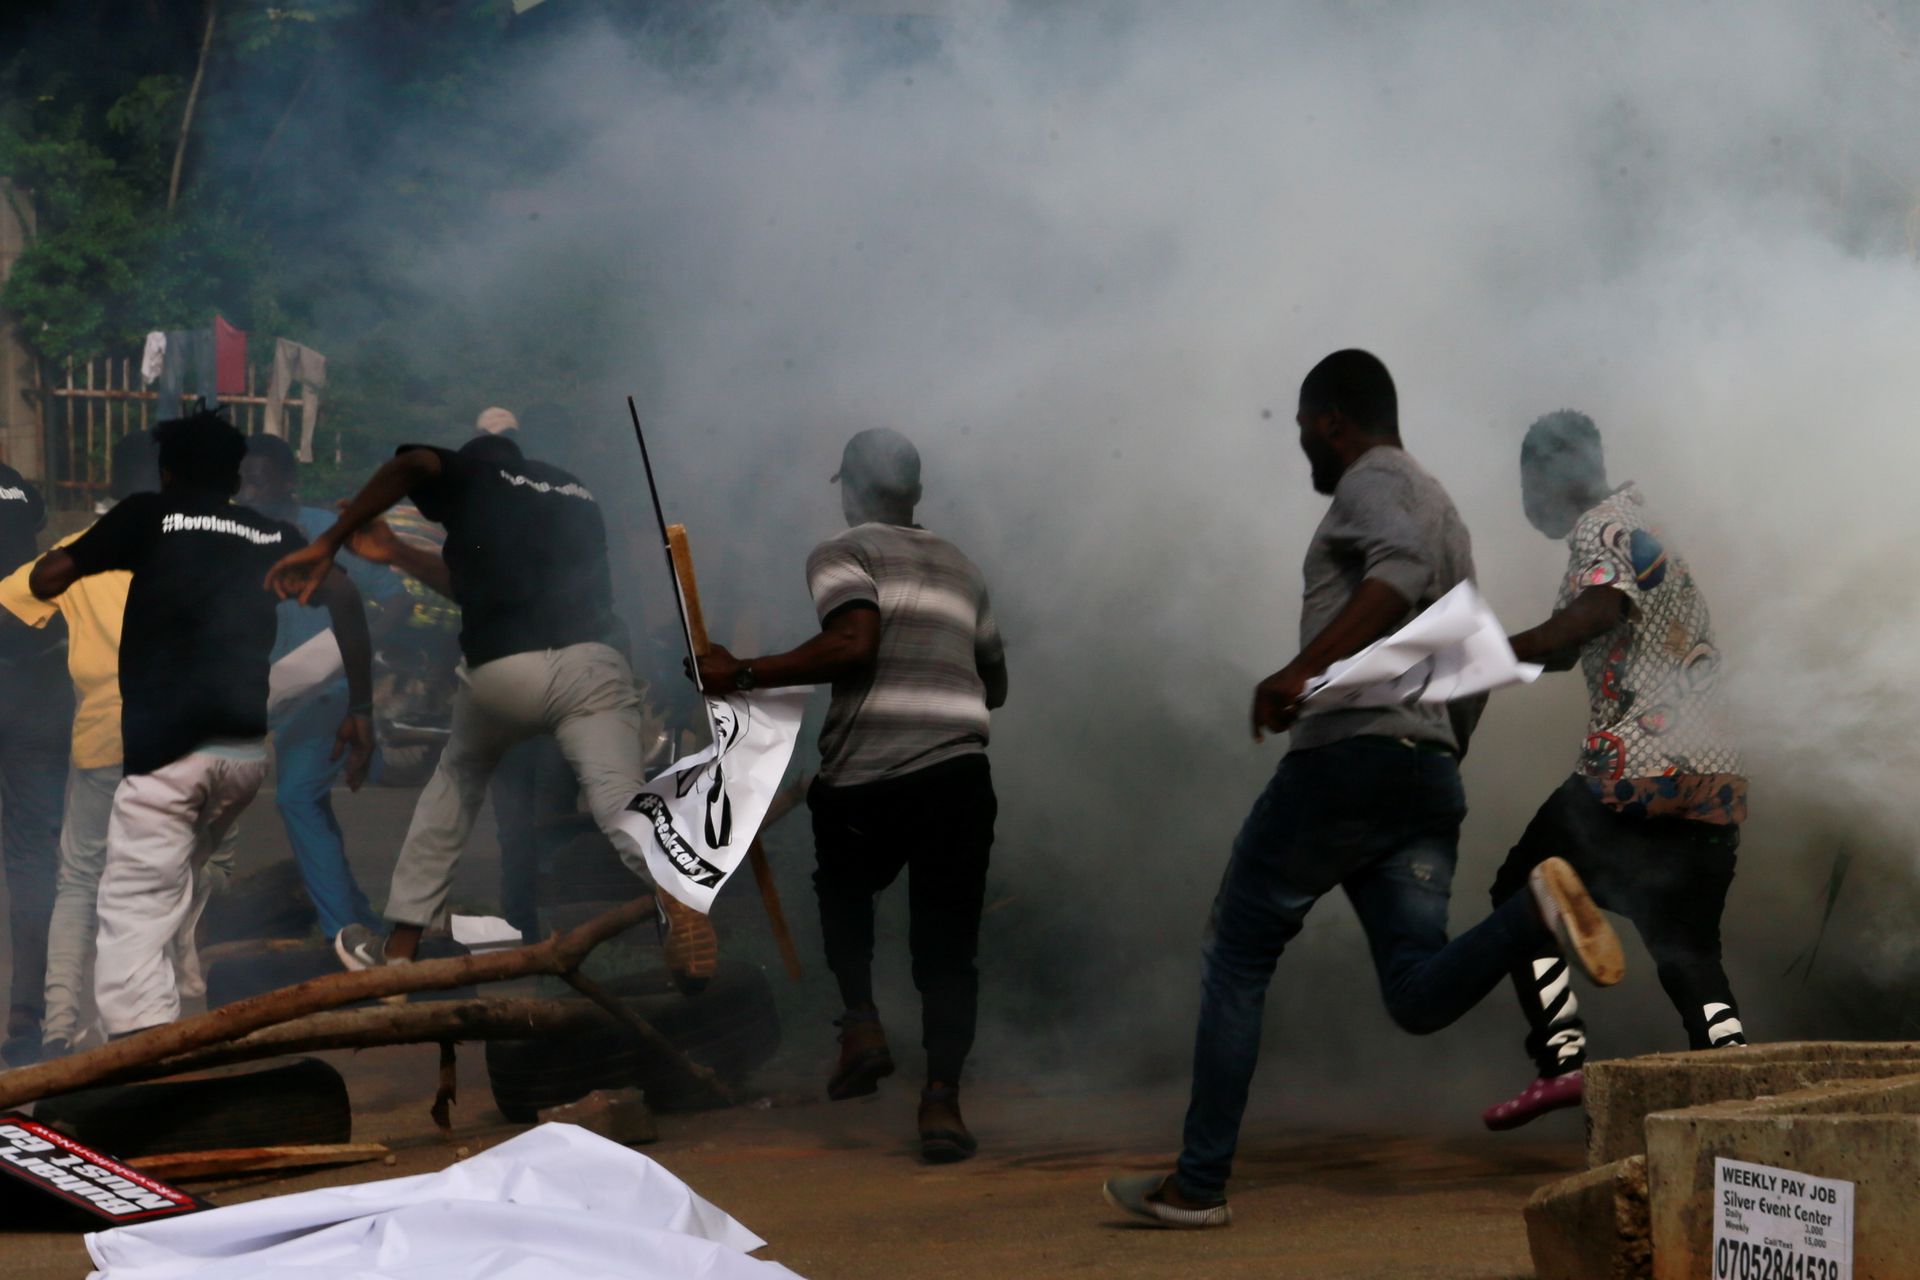 Protesters Tear-gassed